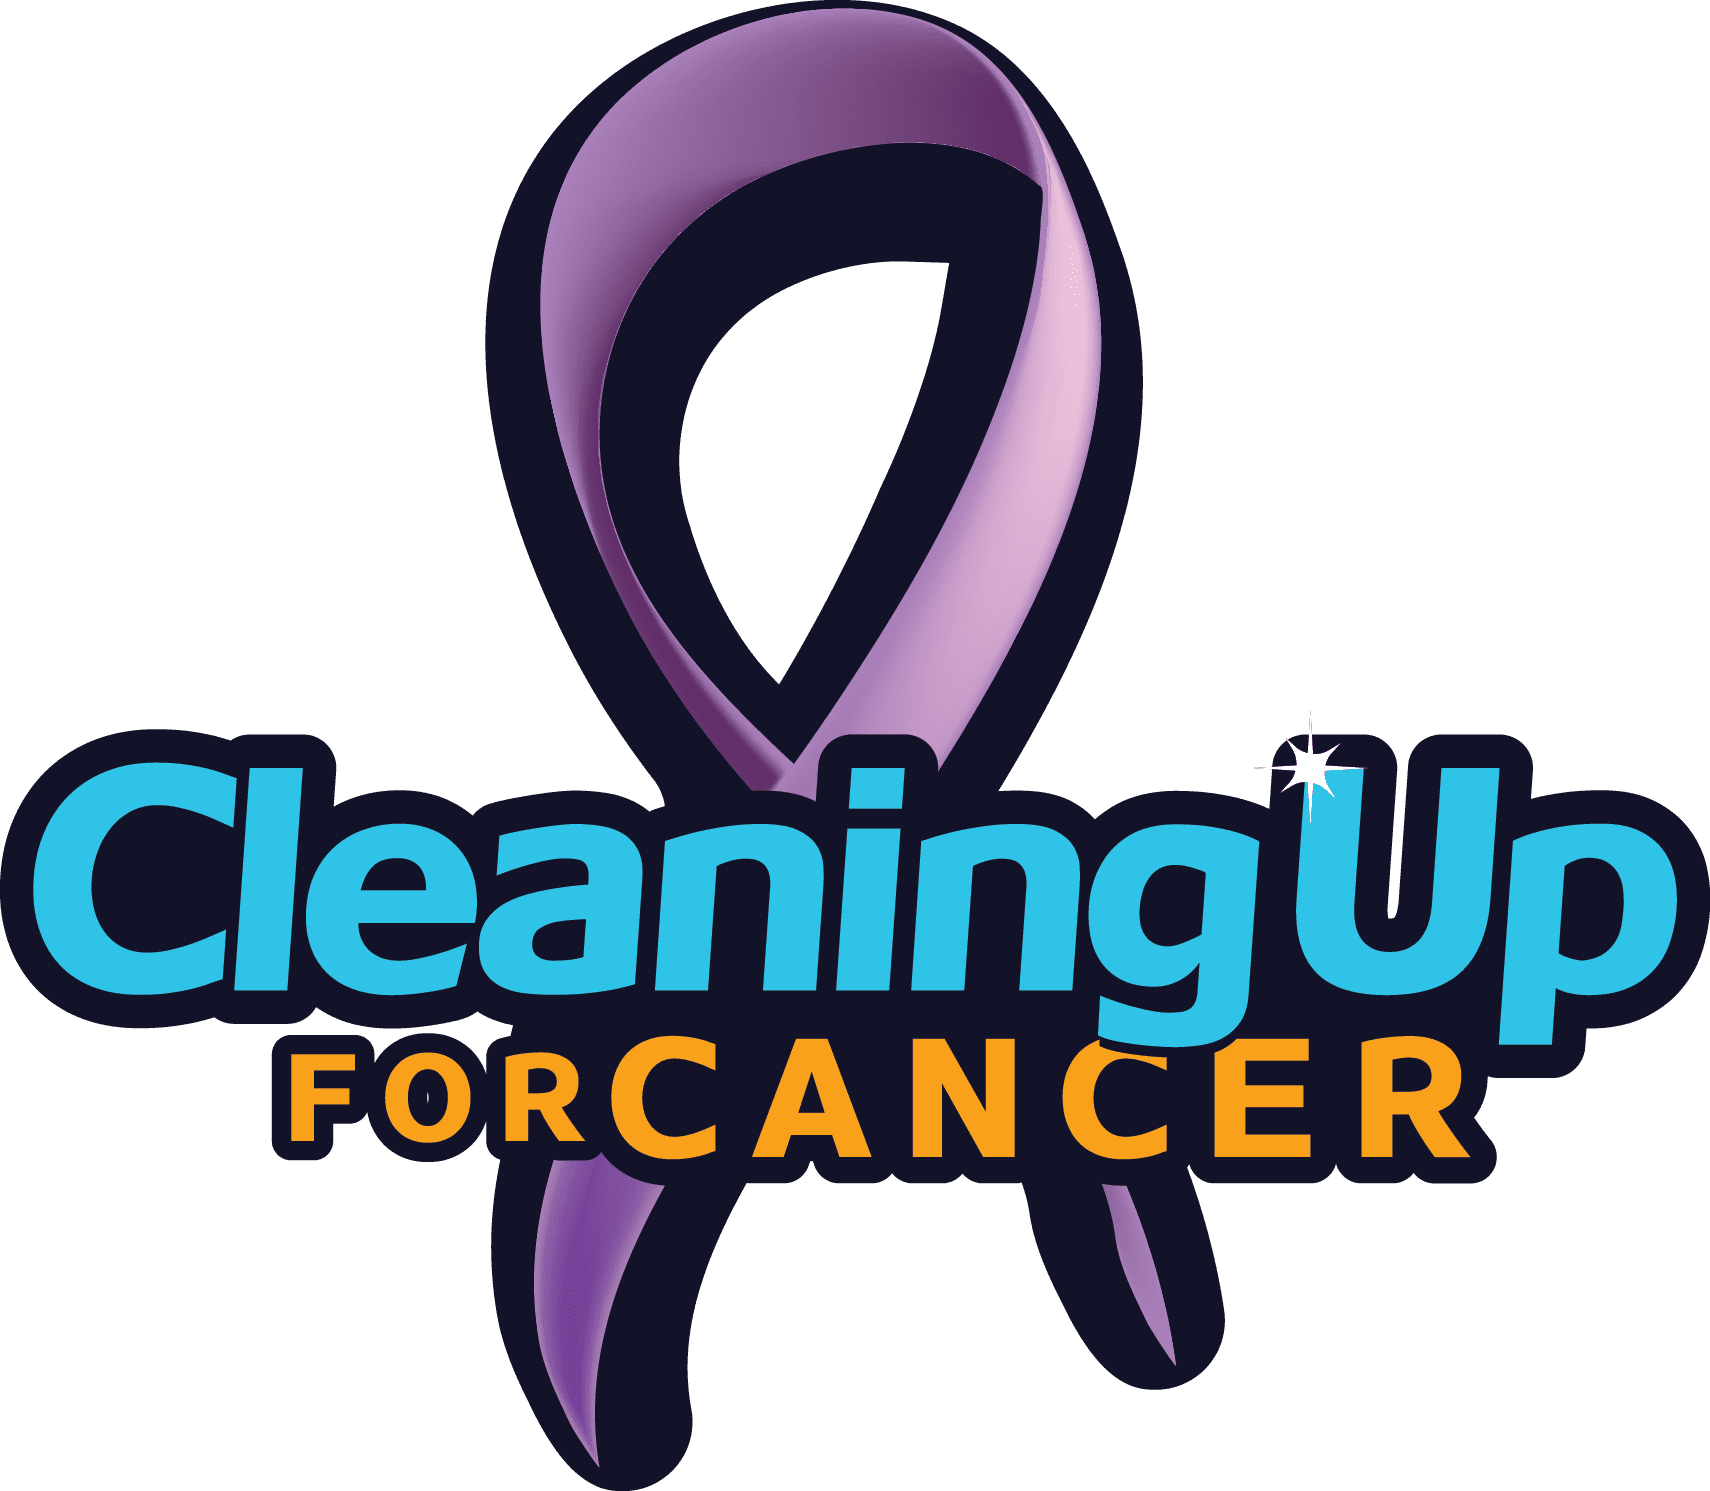 Cleaning up for Cancer